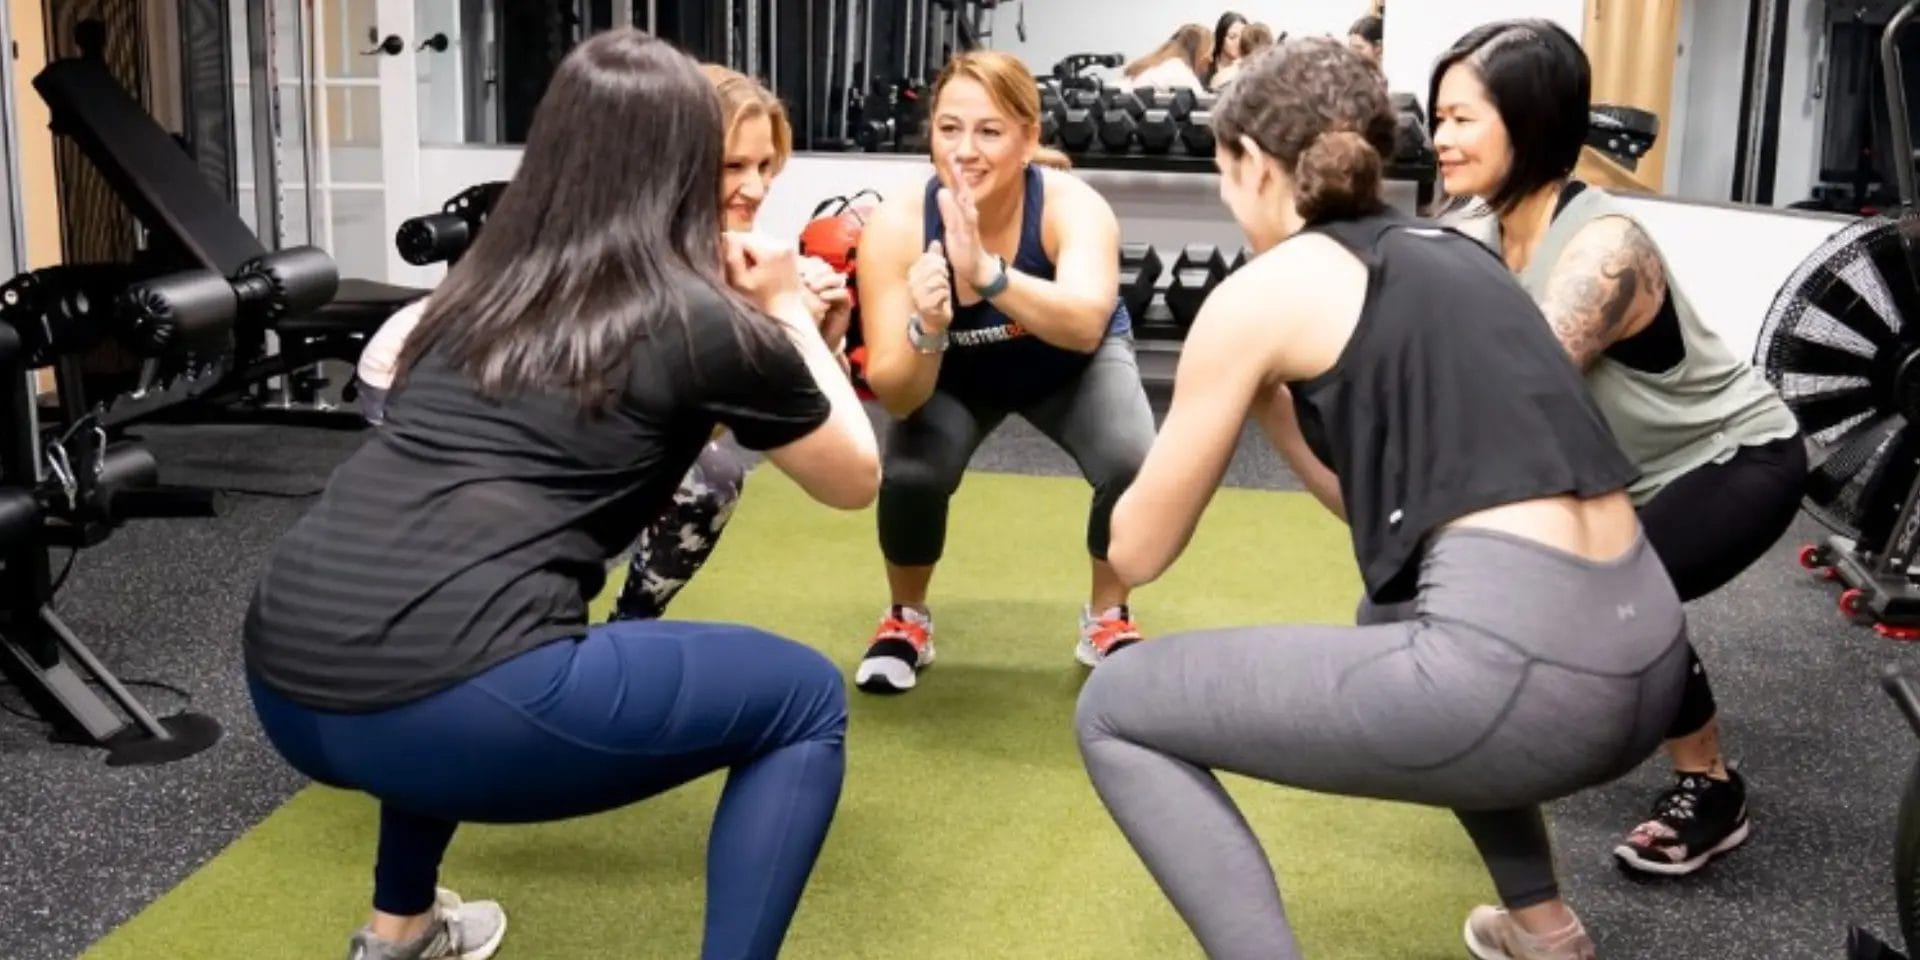 Five women doing squats together at Free2Be Fitness